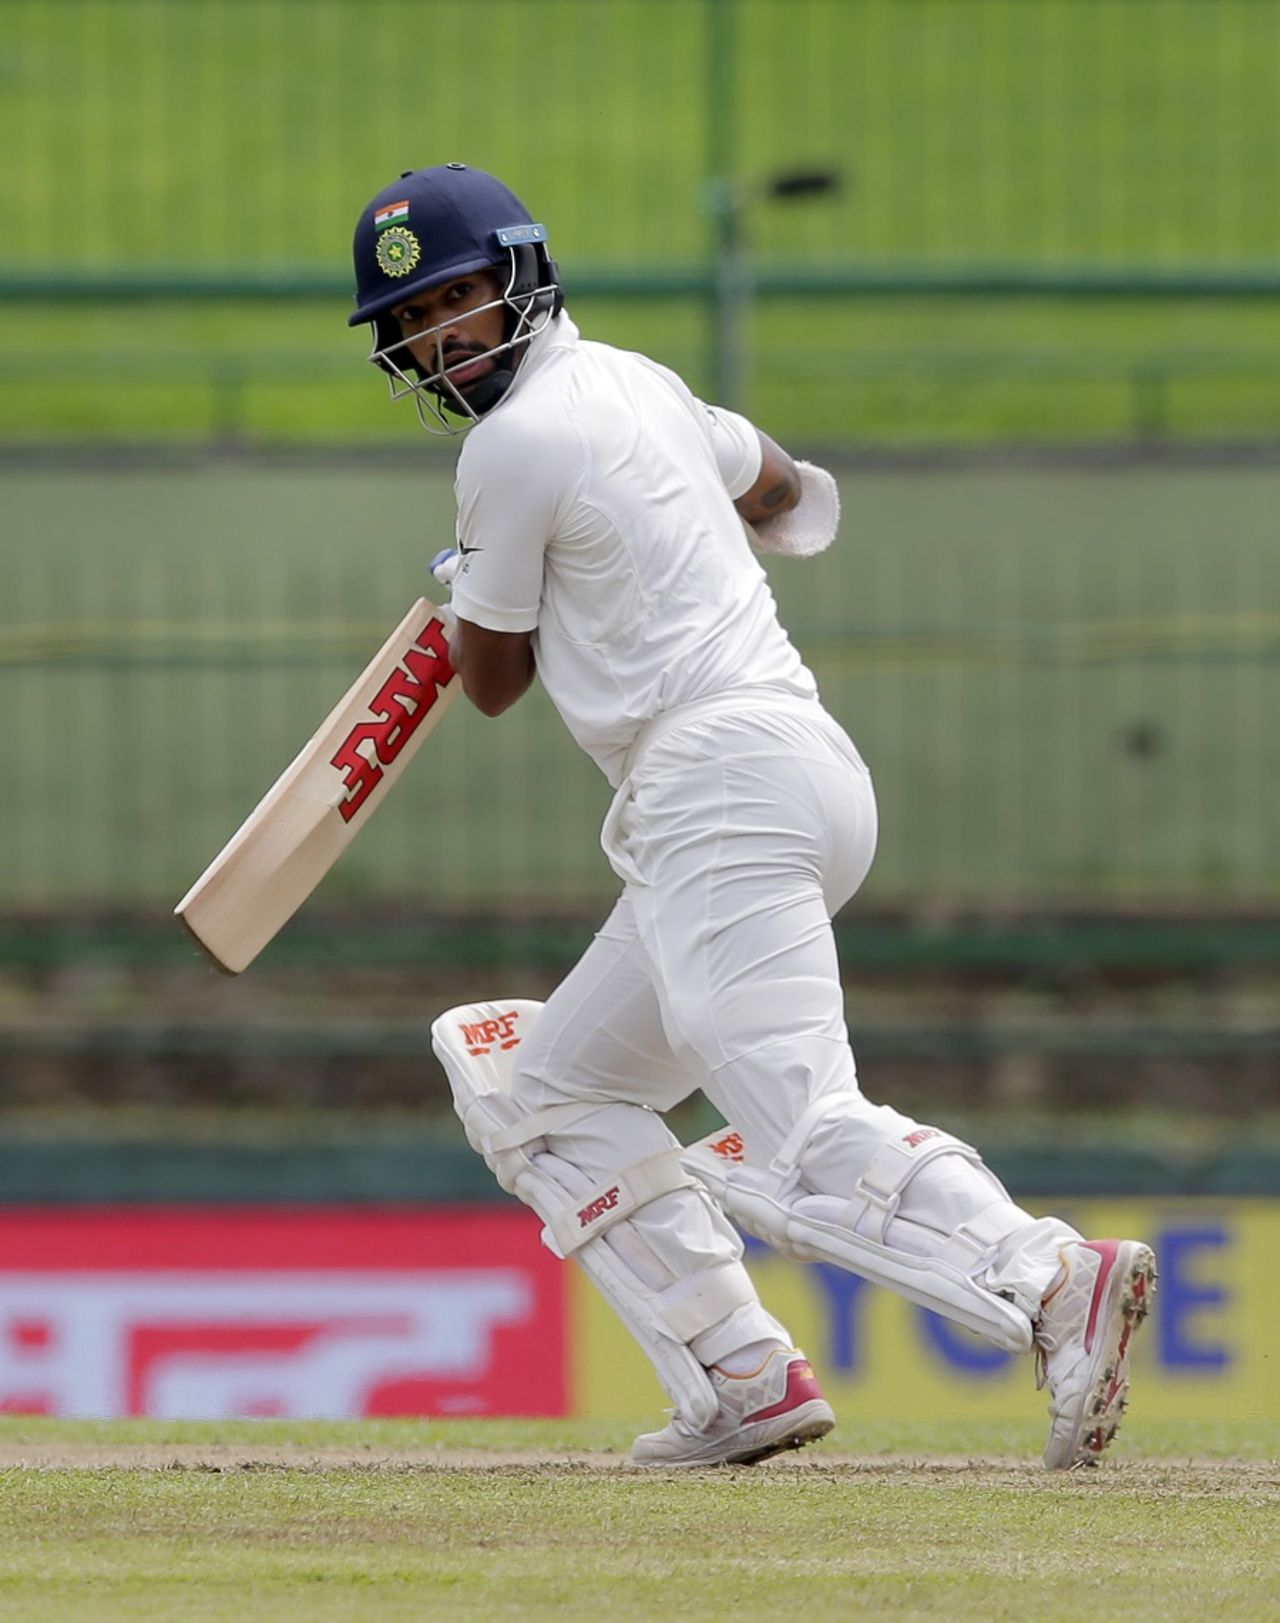 Shikhar Dhawan watches the ball after guiding it towards third man, Sri Lanka v India, 3rd Test, 1st day, Pallekele, August 12, 2017